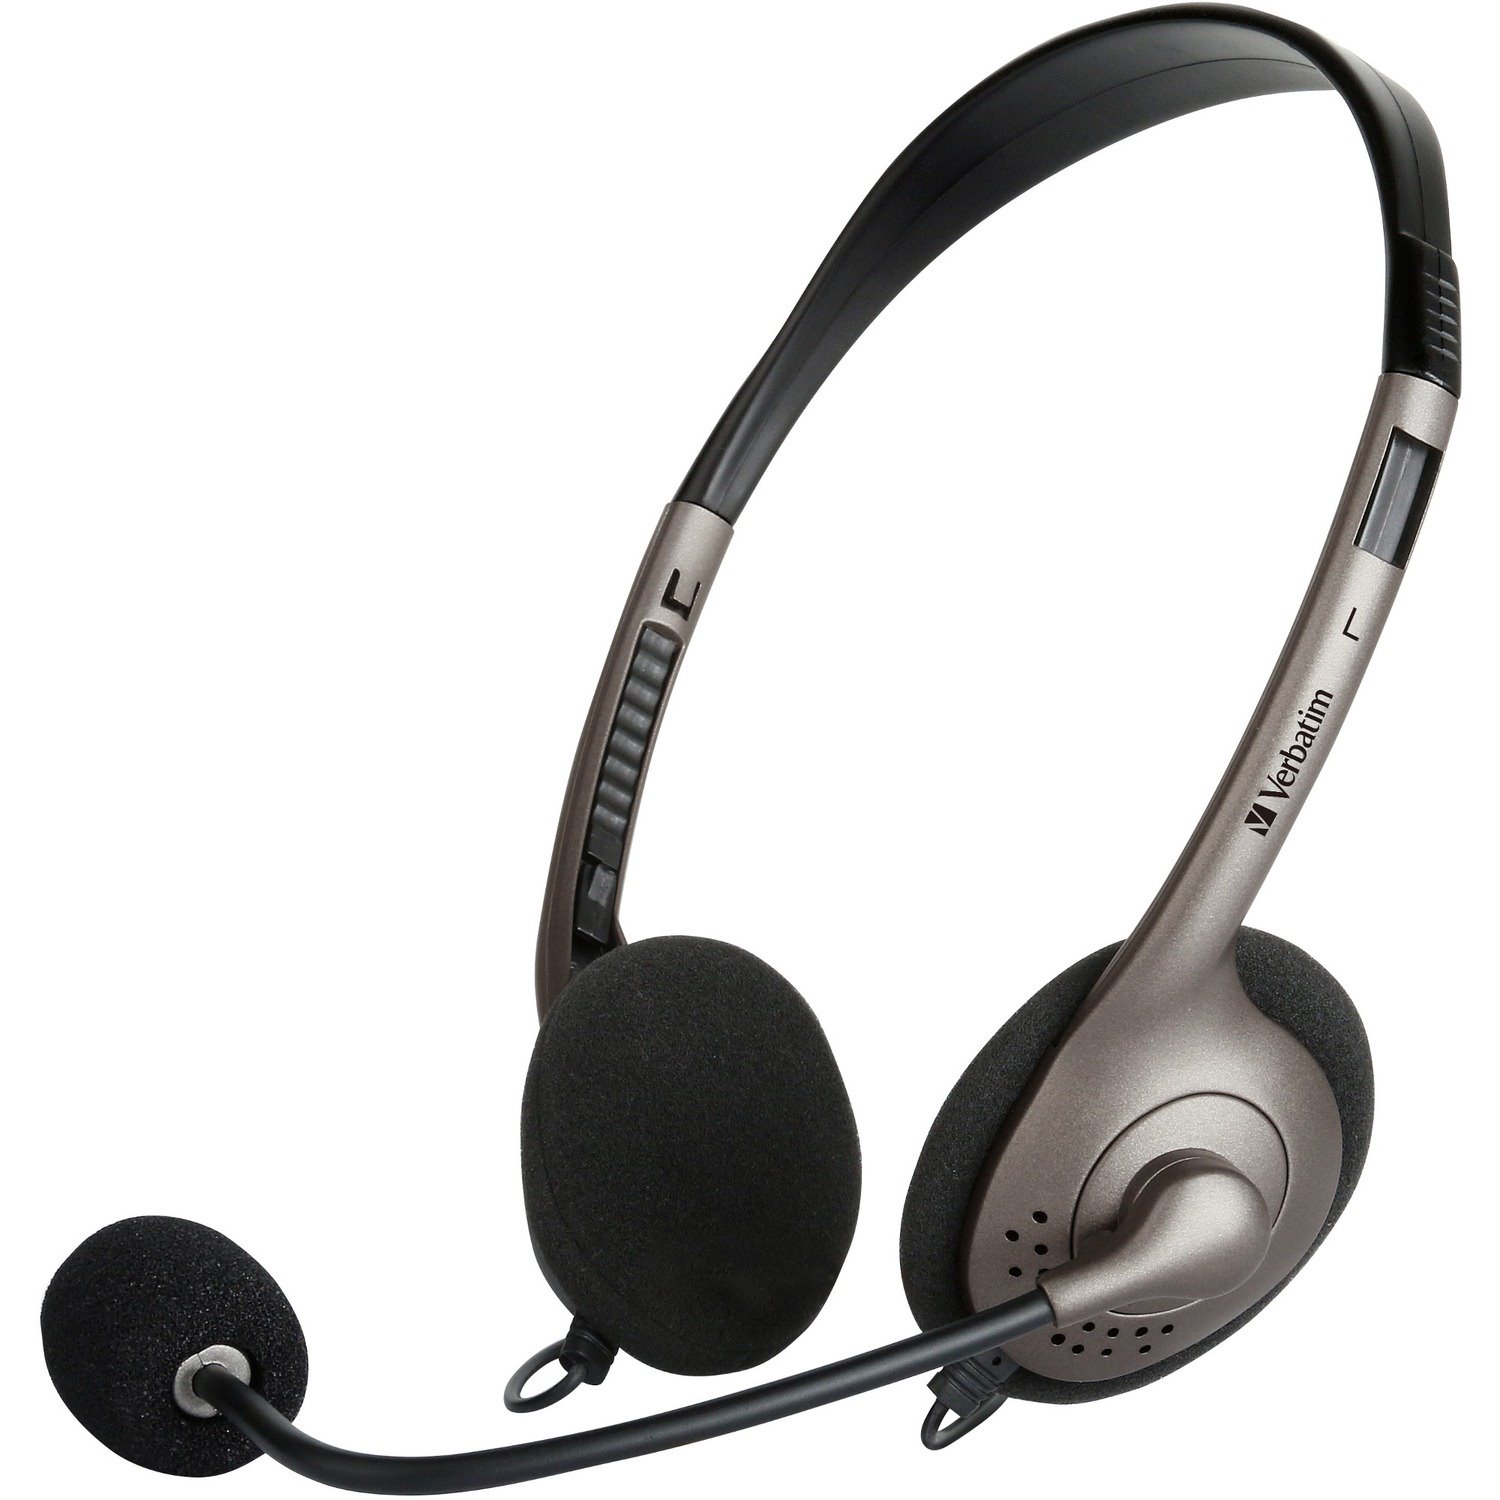 Verbatim Wired Over-the-head Stereo Headset - Graphite